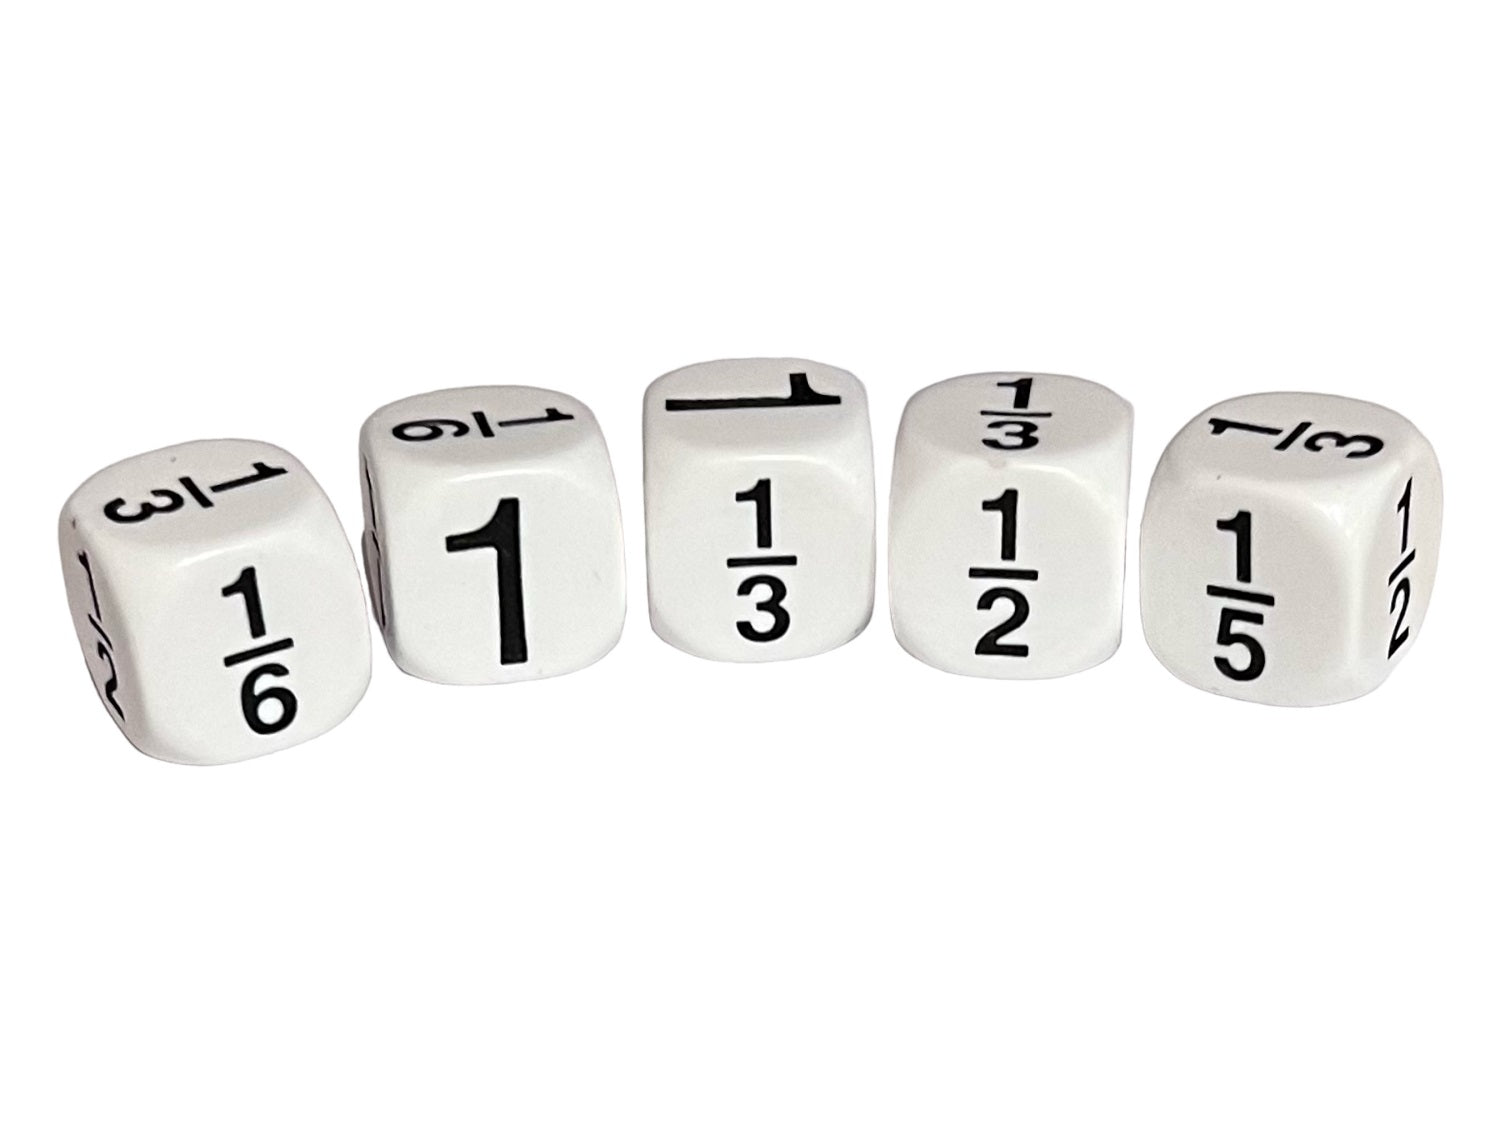 Dice - Fractions Dice (1, 1/2, 1/3, 1/4, 1/5, 1/6)